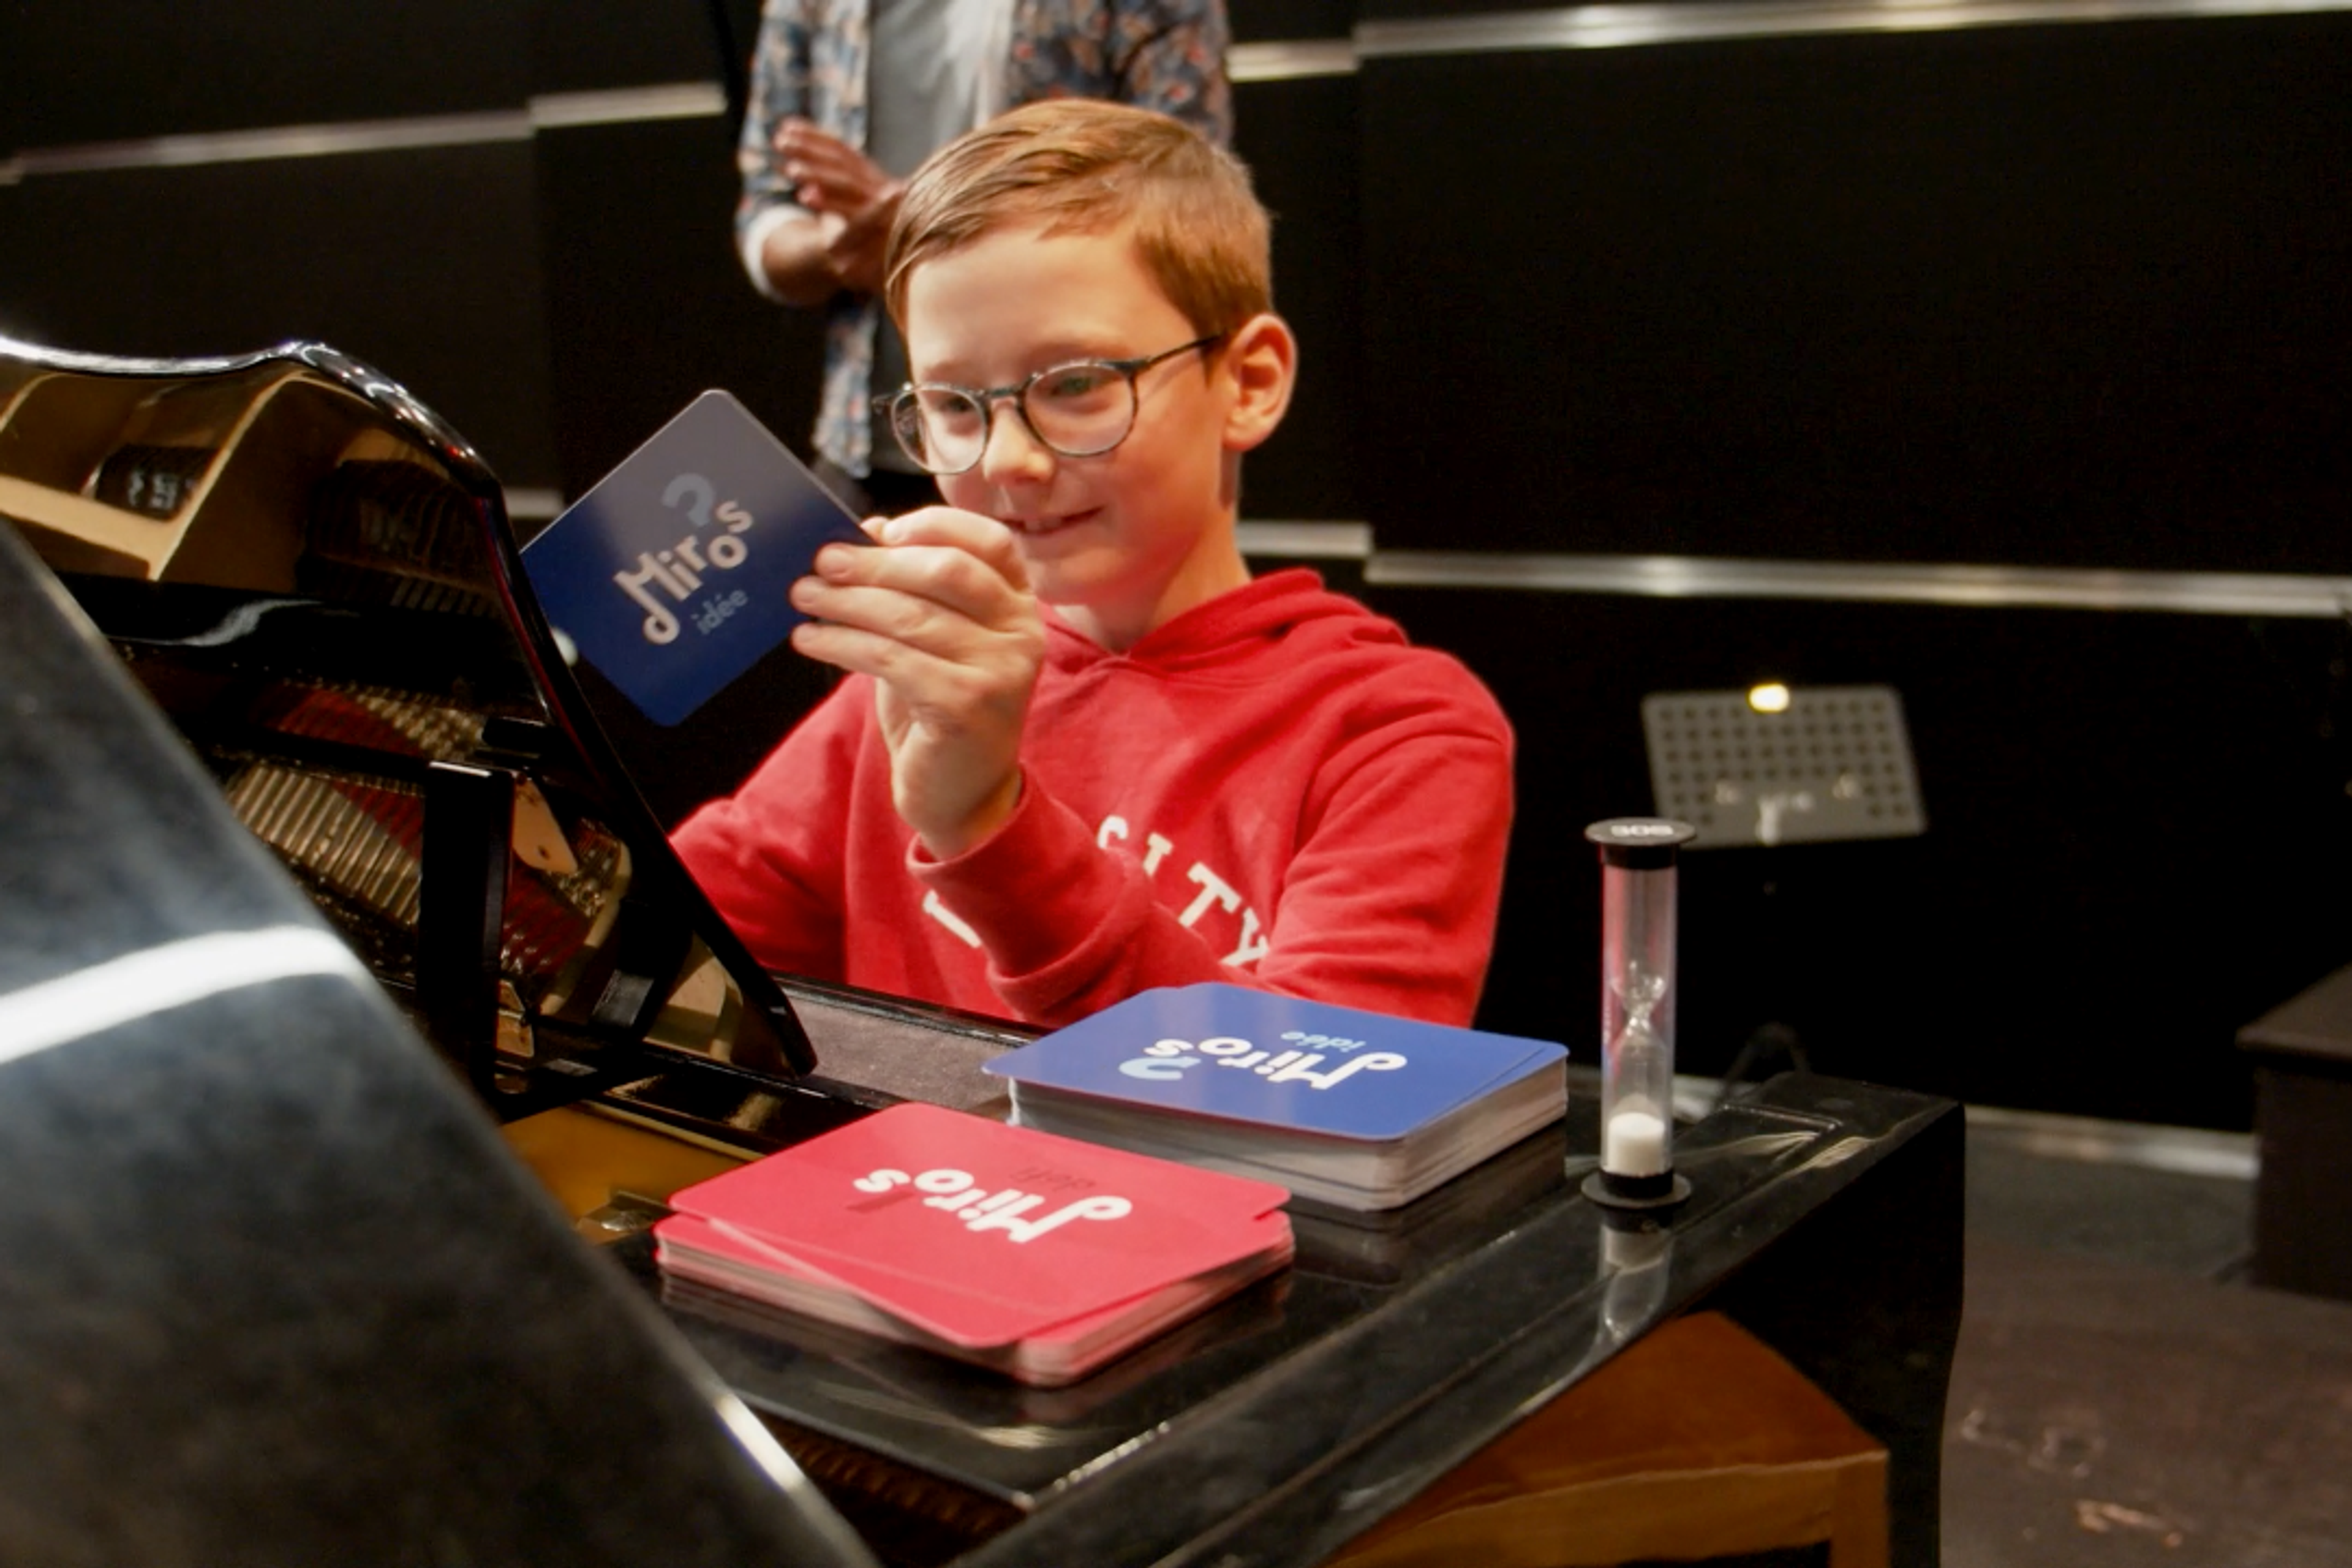 A young musician handling cards sitting at a piano